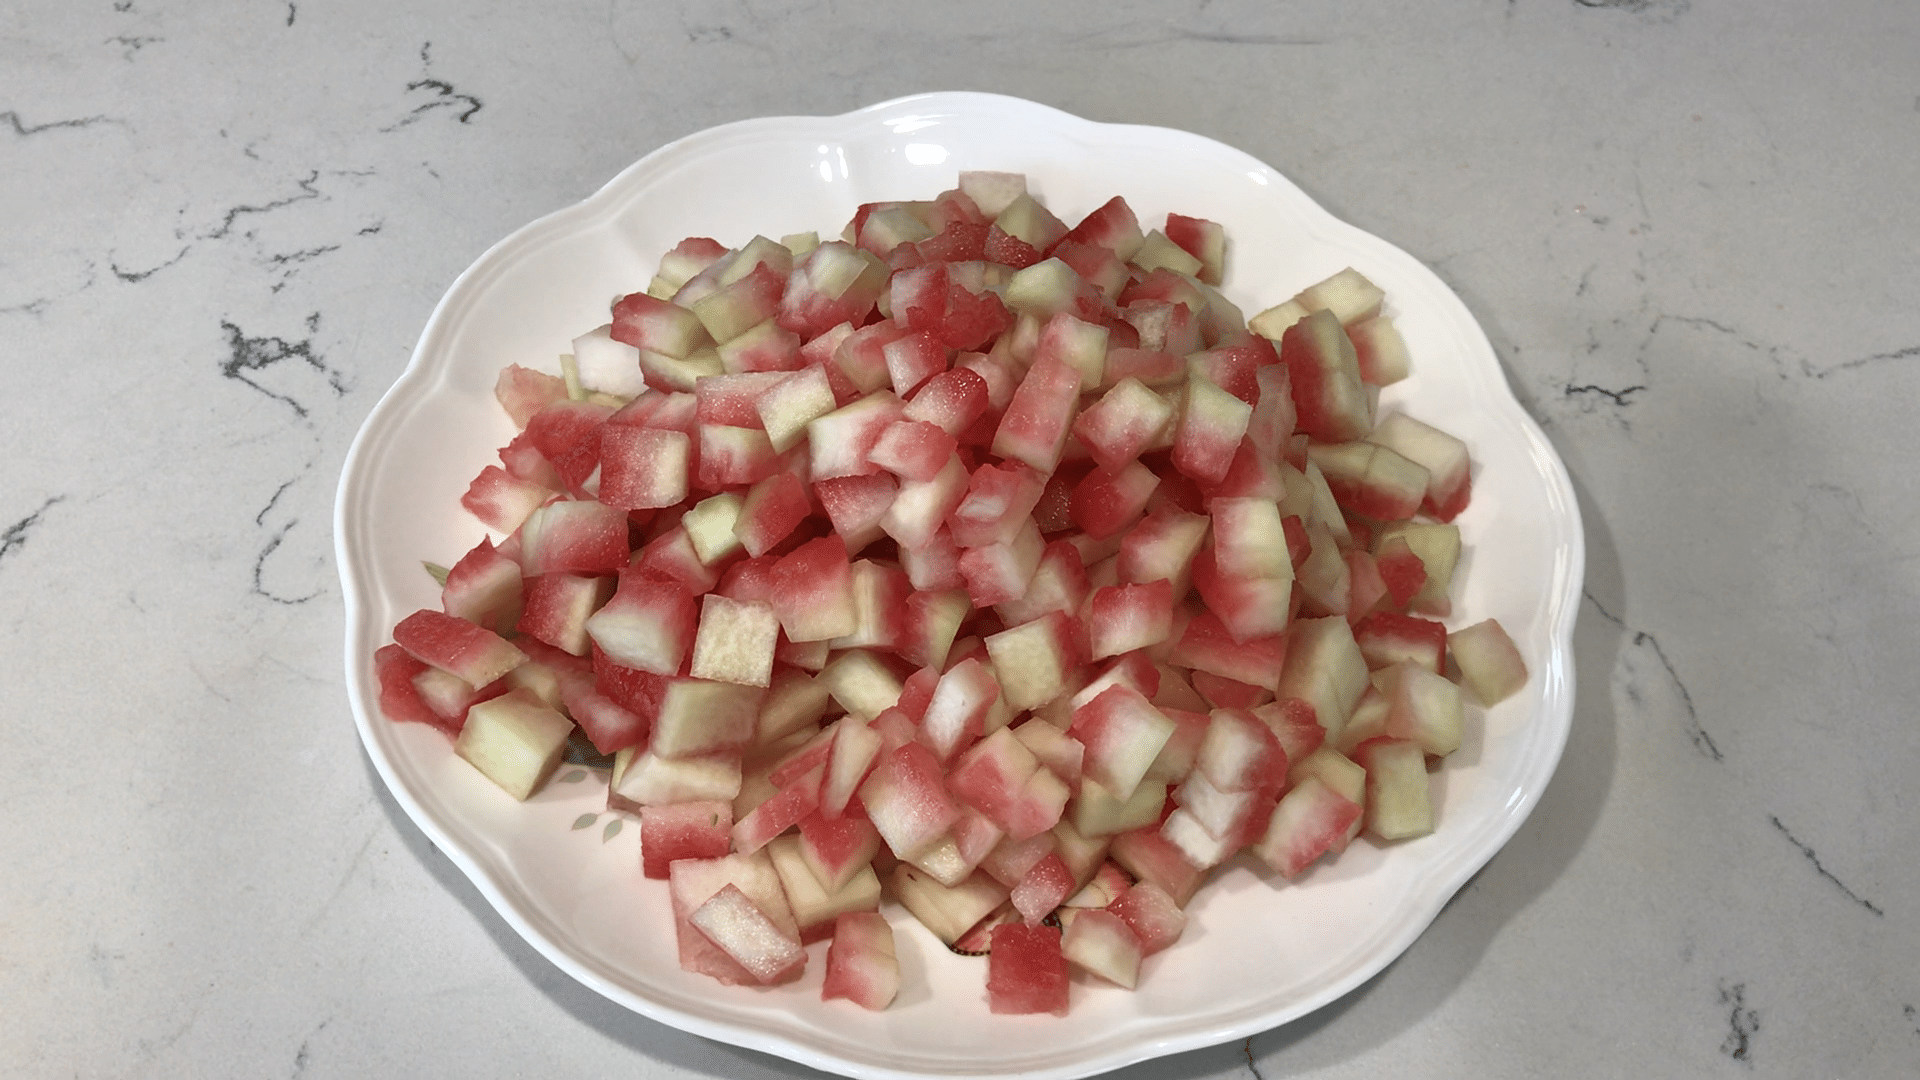 A bowl of watermelon rind on a plate